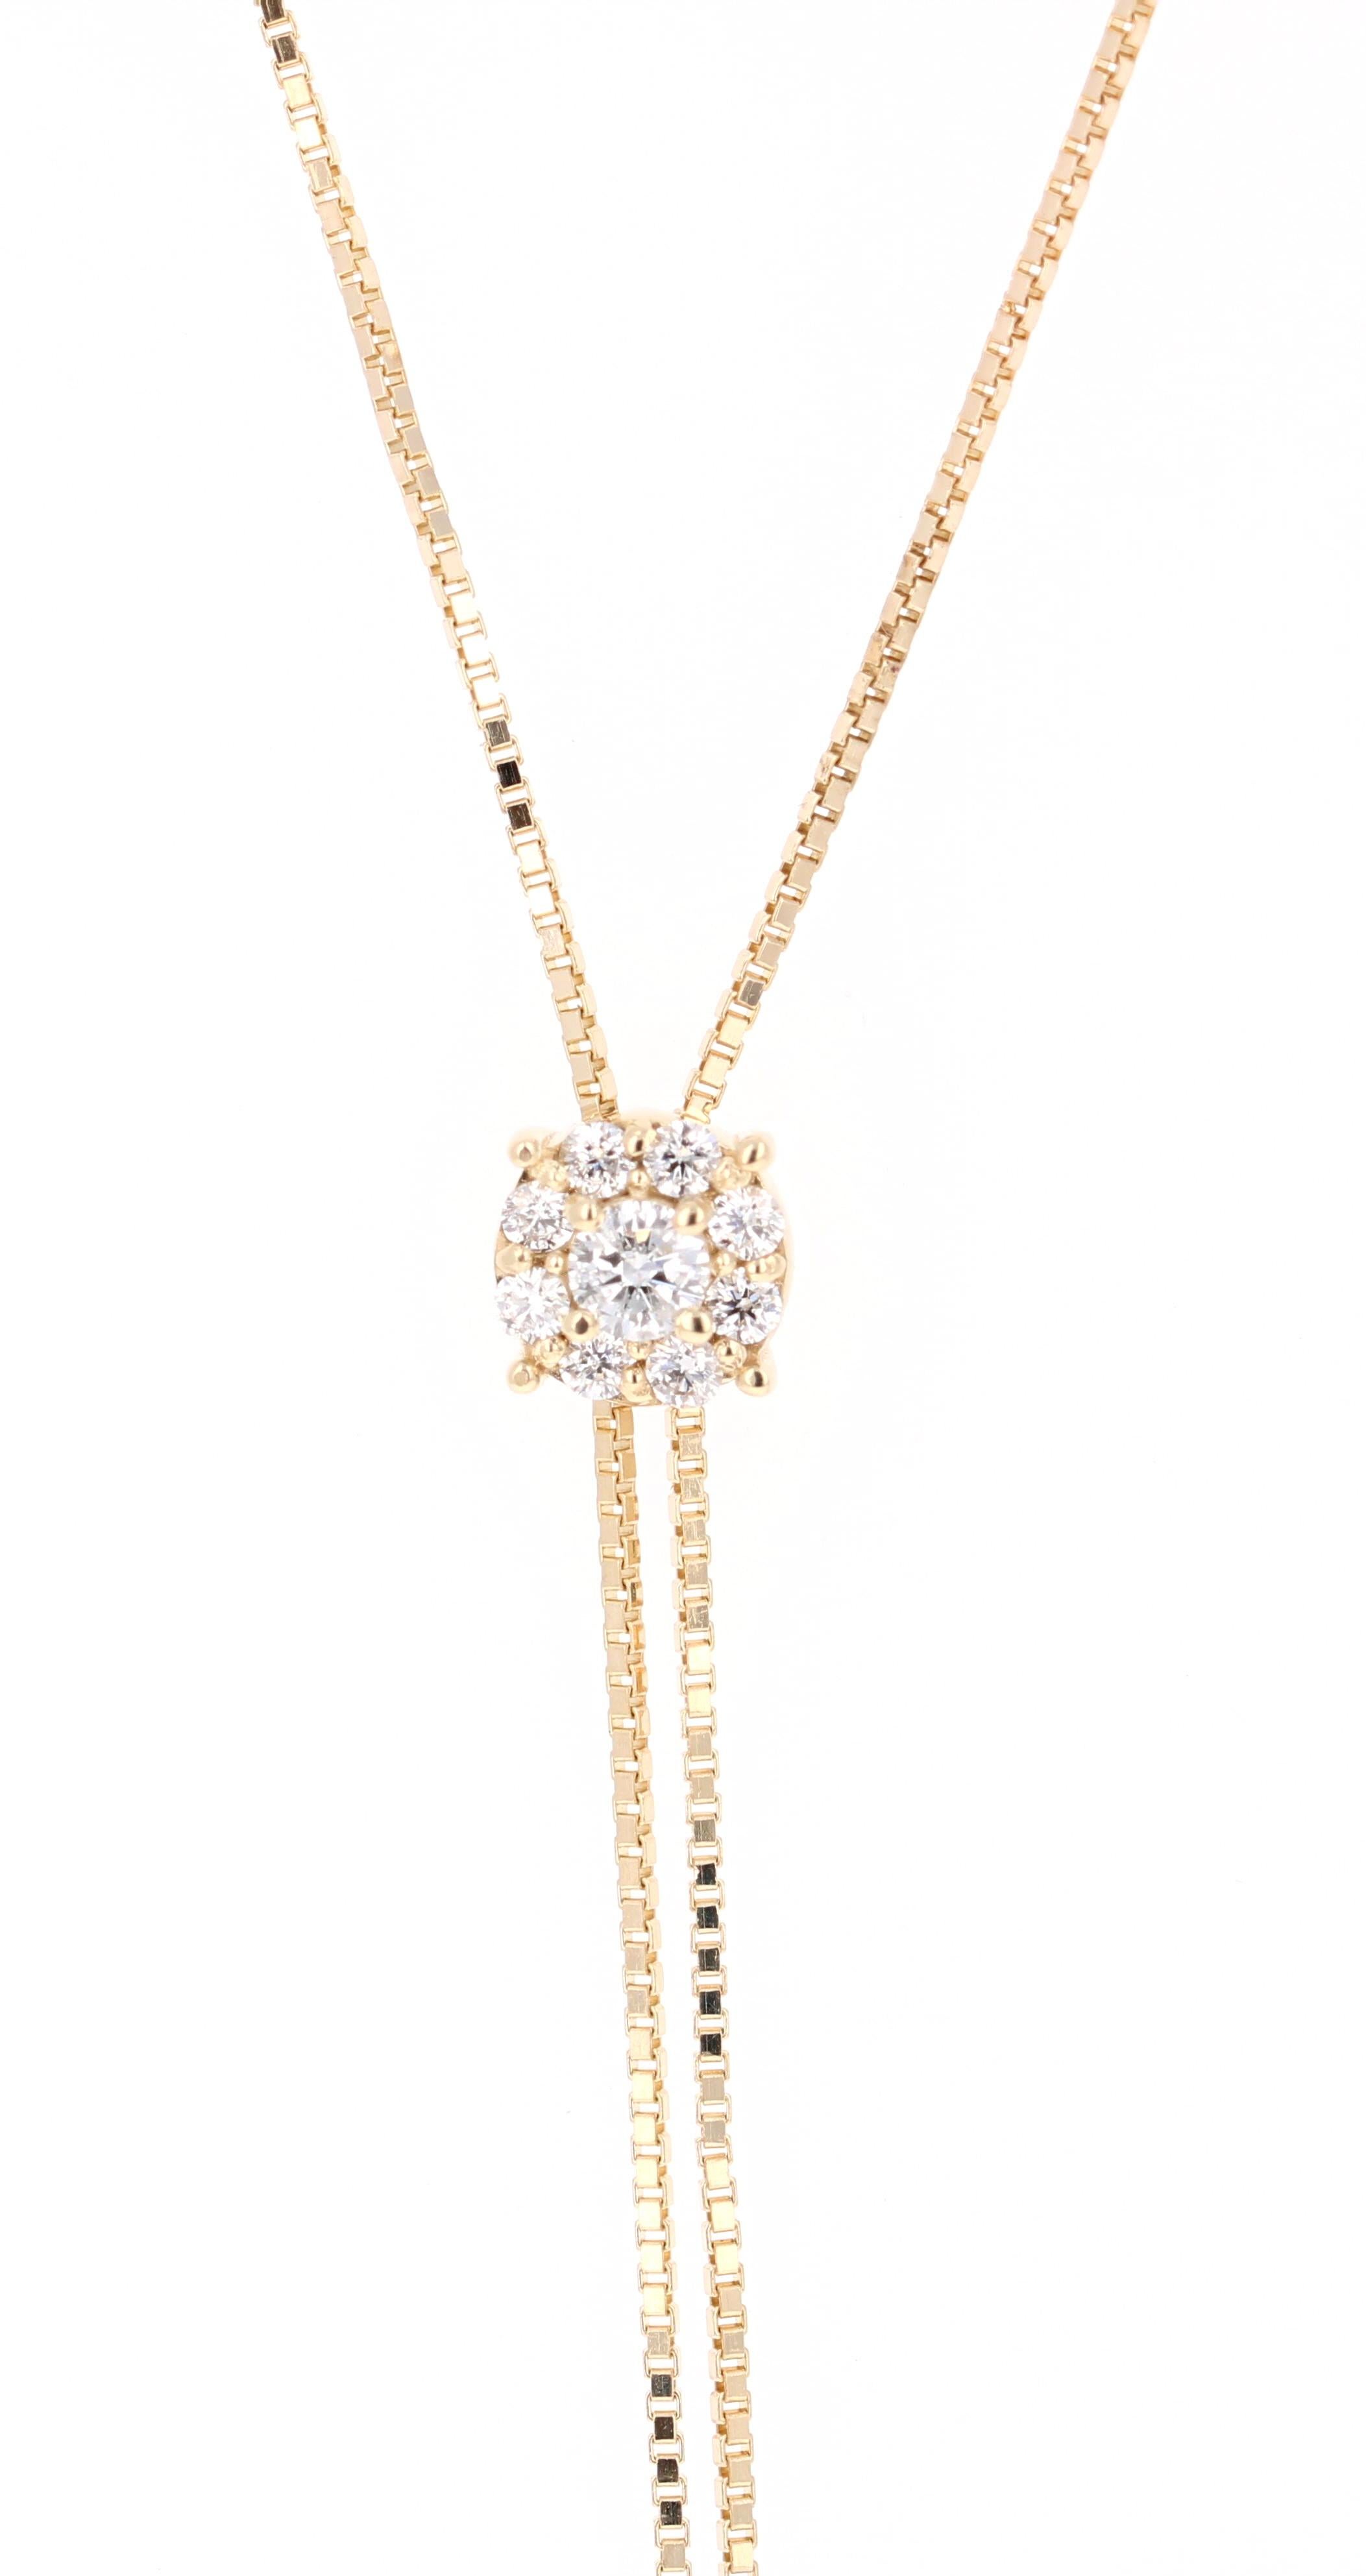 Beautiful, Elegant and On-trend Lariat style necklace!!  It has 9 Round Cut Diamonds (Clarity: SI, Color: F) that weigh 0.40 Carats. 

It is beautifully curated in 14 Karat Yellow Gold and weighs 5.8 grams and is approximately 20 inches long.   The